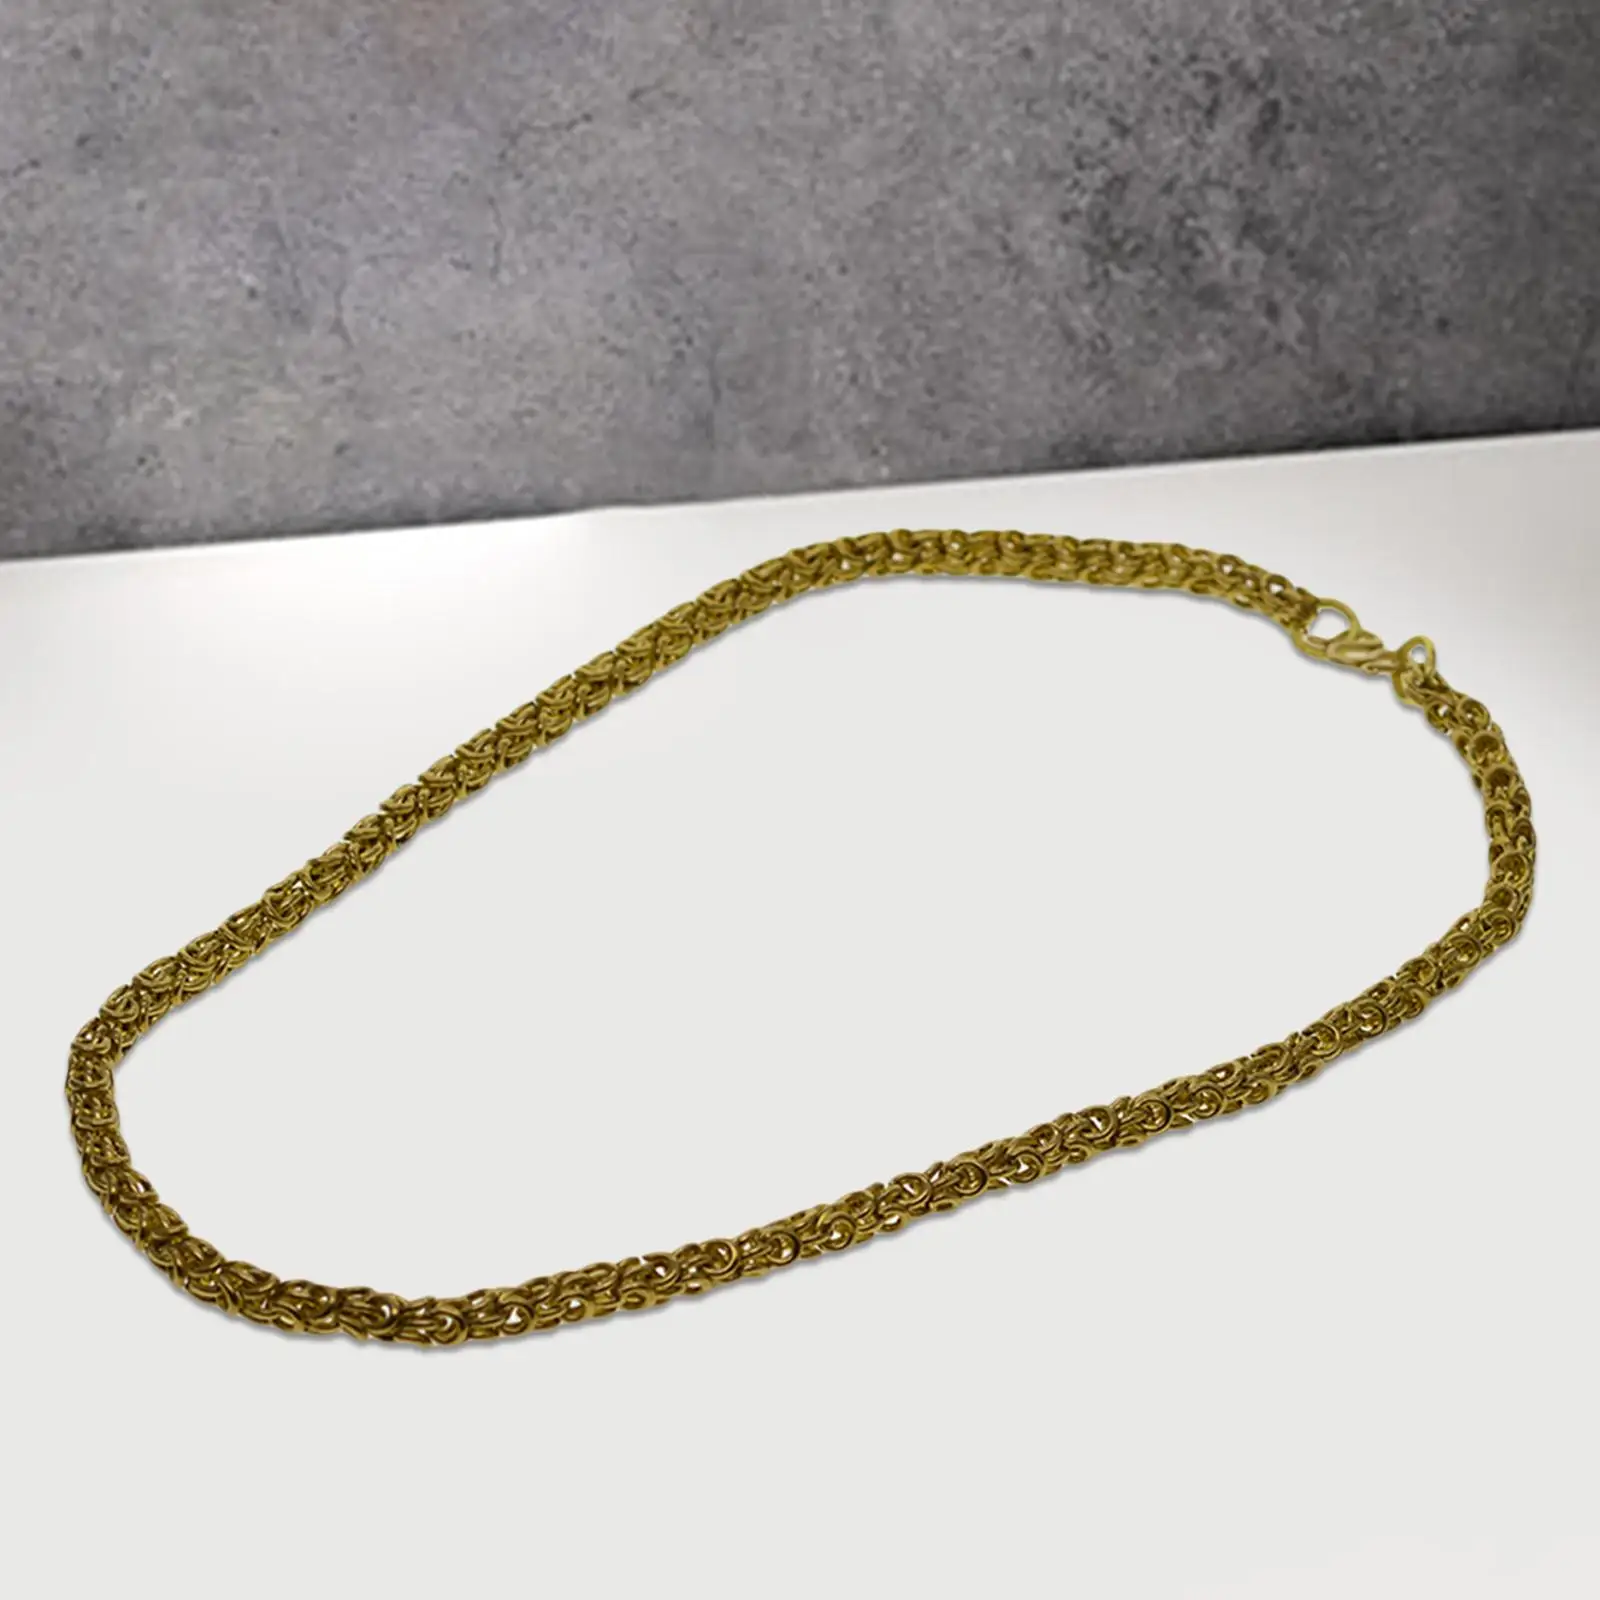 Unisex Chain Necklace Brass Versatile Punk Fashion Choker Necklace Link Chain for Beach Dancing Prom Travel Carnivals Work